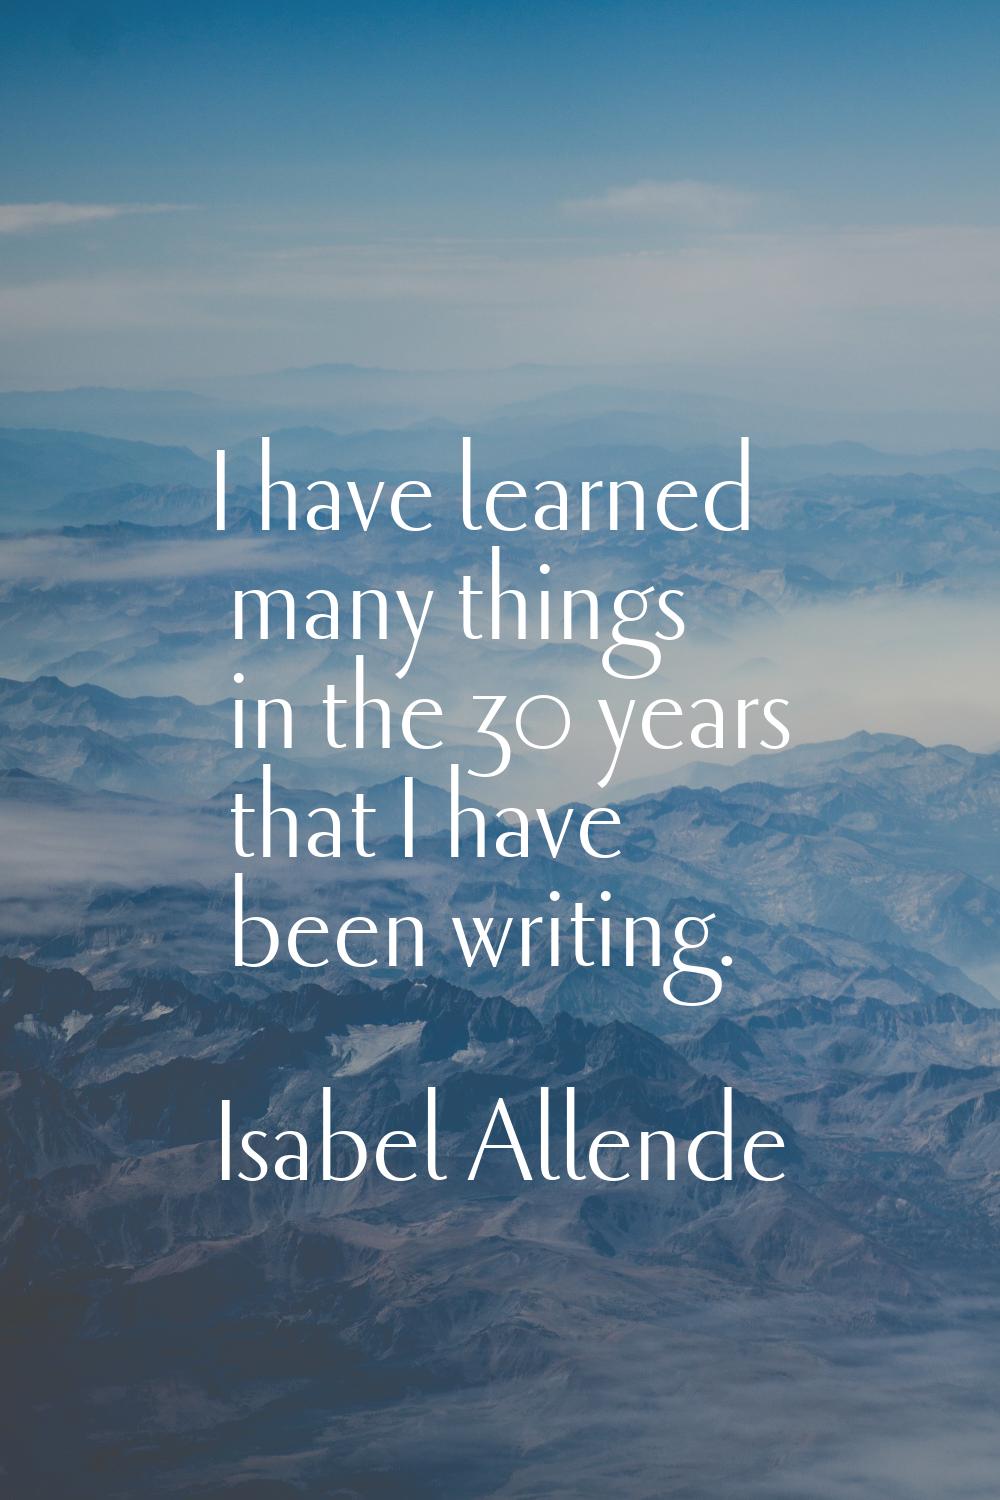 I have learned many things in the 30 years that I have been writing.